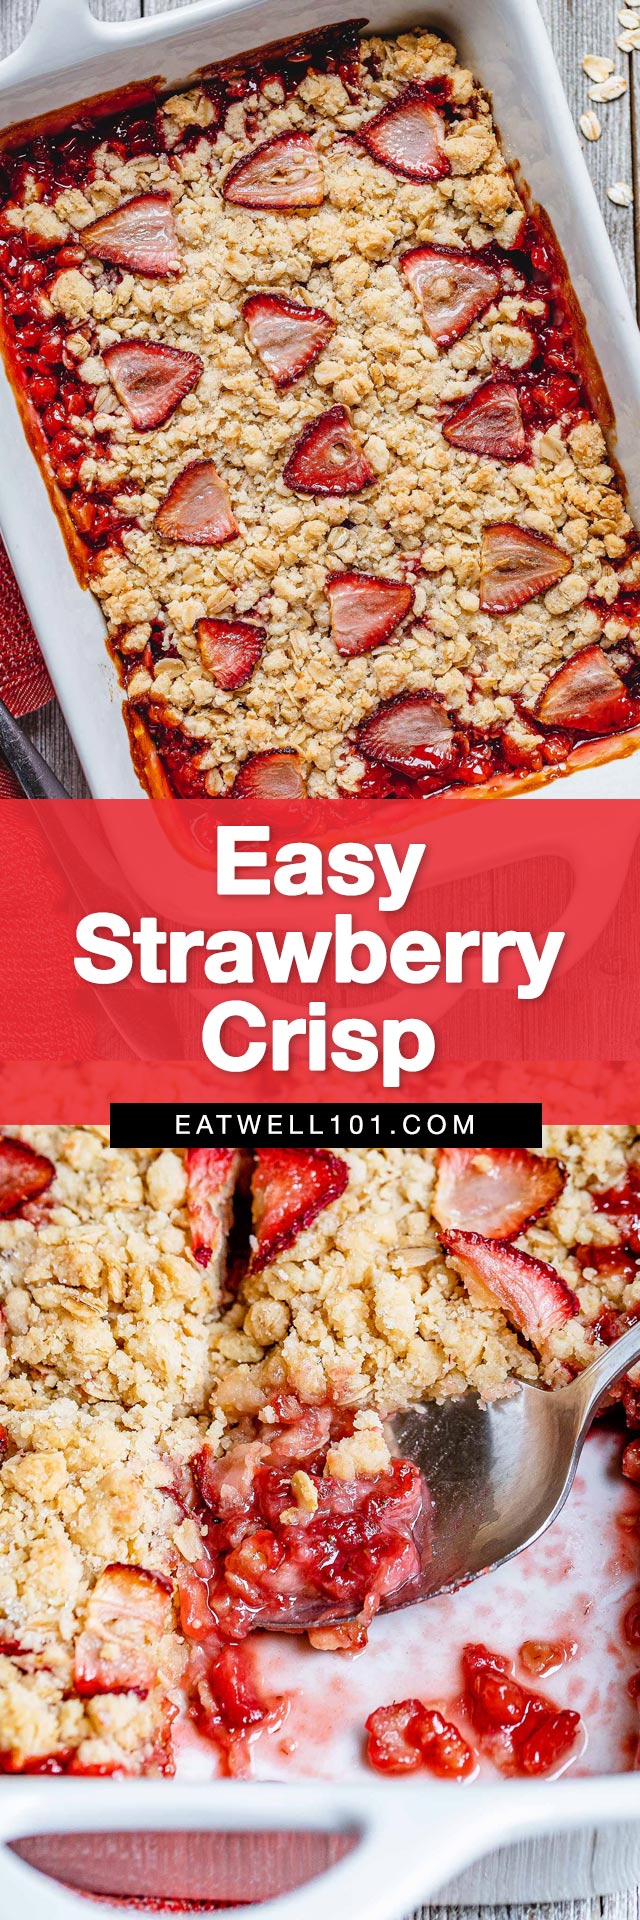 Strawberry Crisp Recipe - #strawberry #crisp #recipe #eatwell101 - This juicy and sweet strawberry crisp is super easy and makes a spectacular summer dessert! 